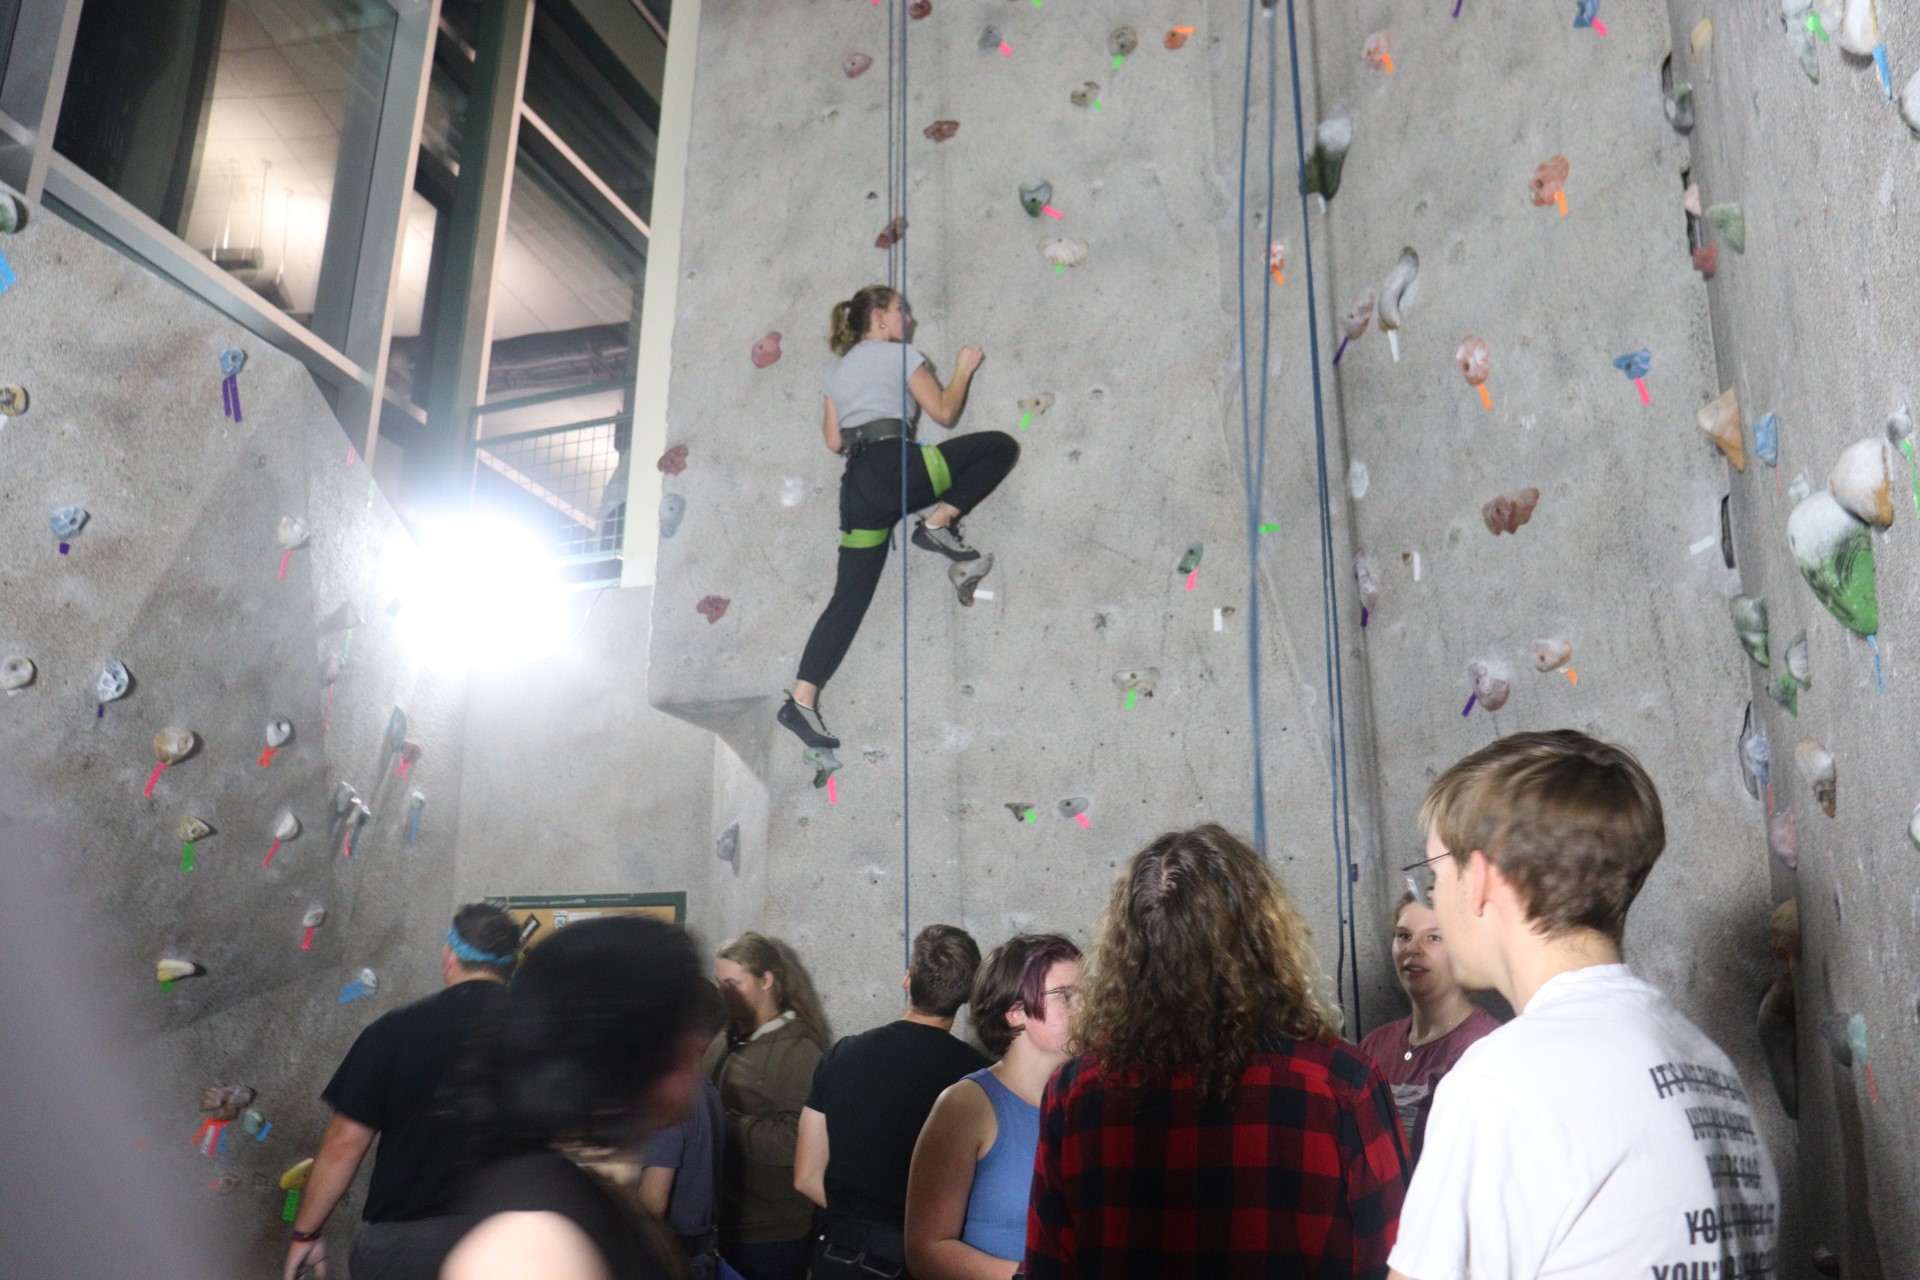 Climbing Club and rock wall back in action after 2 months